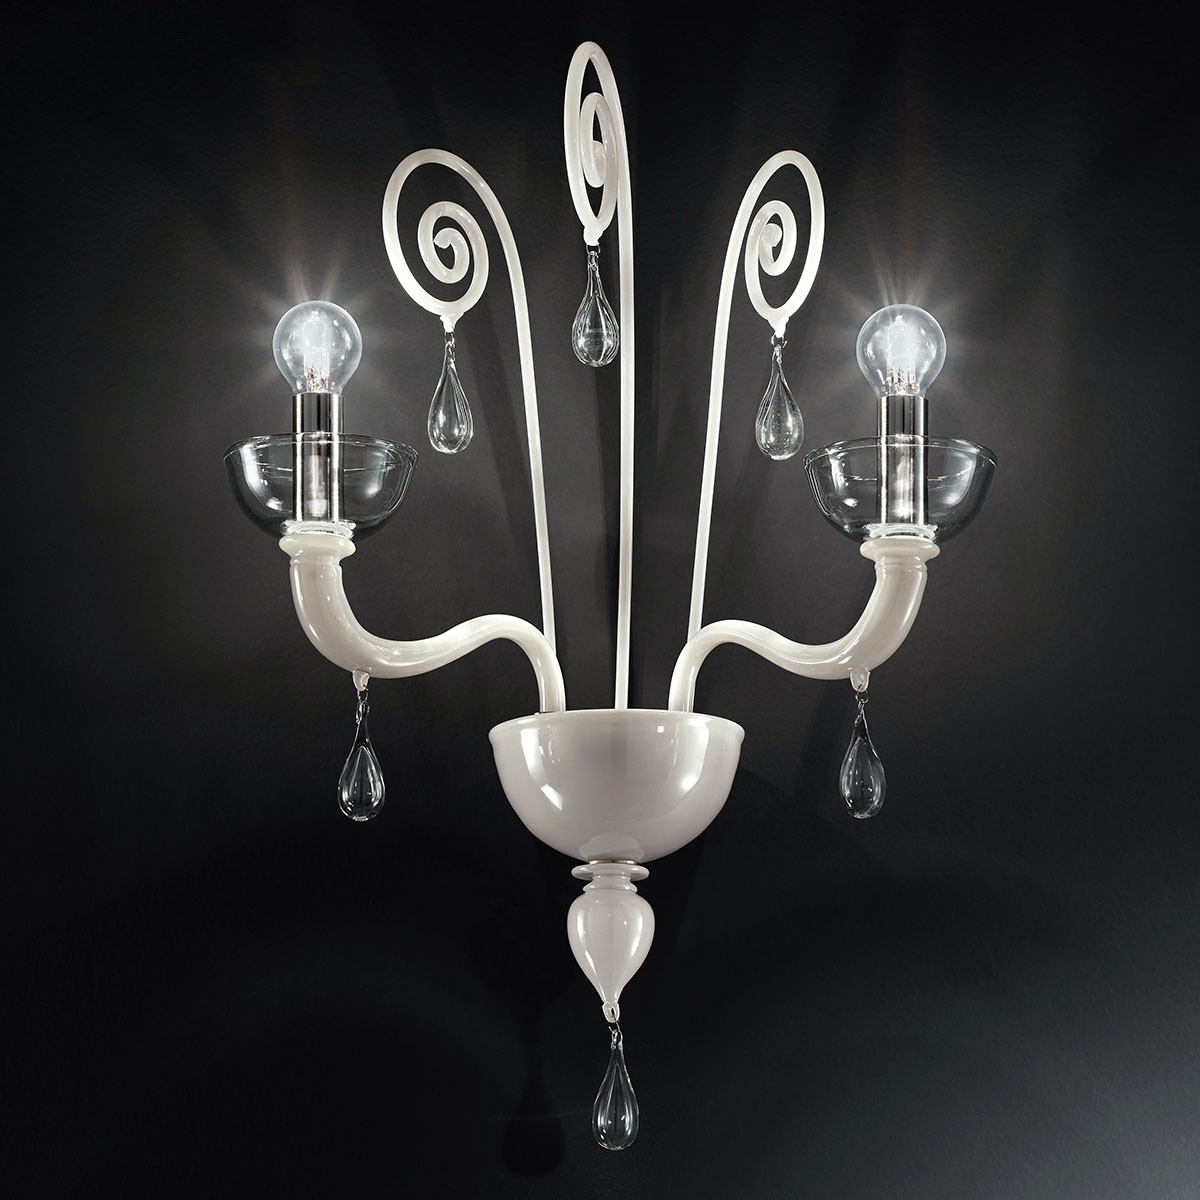 "Duncan" Murano glass sconce - 2 lights - white and transparent